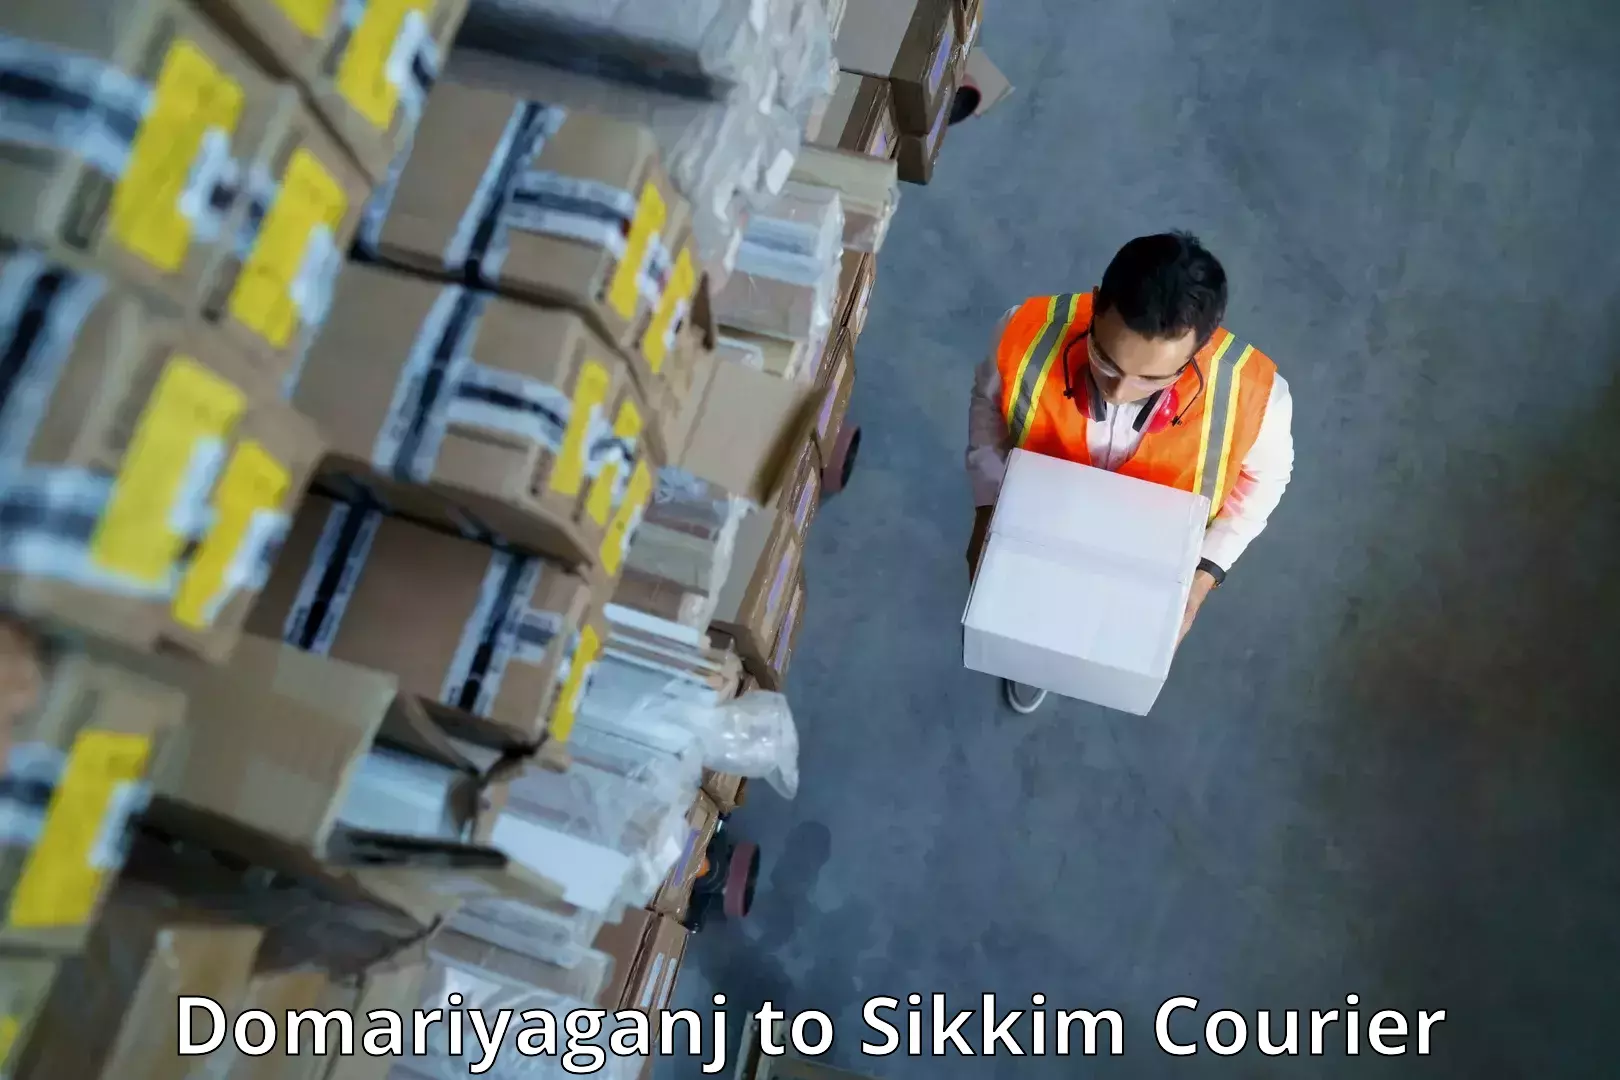 State-of-the-art courier technology Domariyaganj to Sikkim